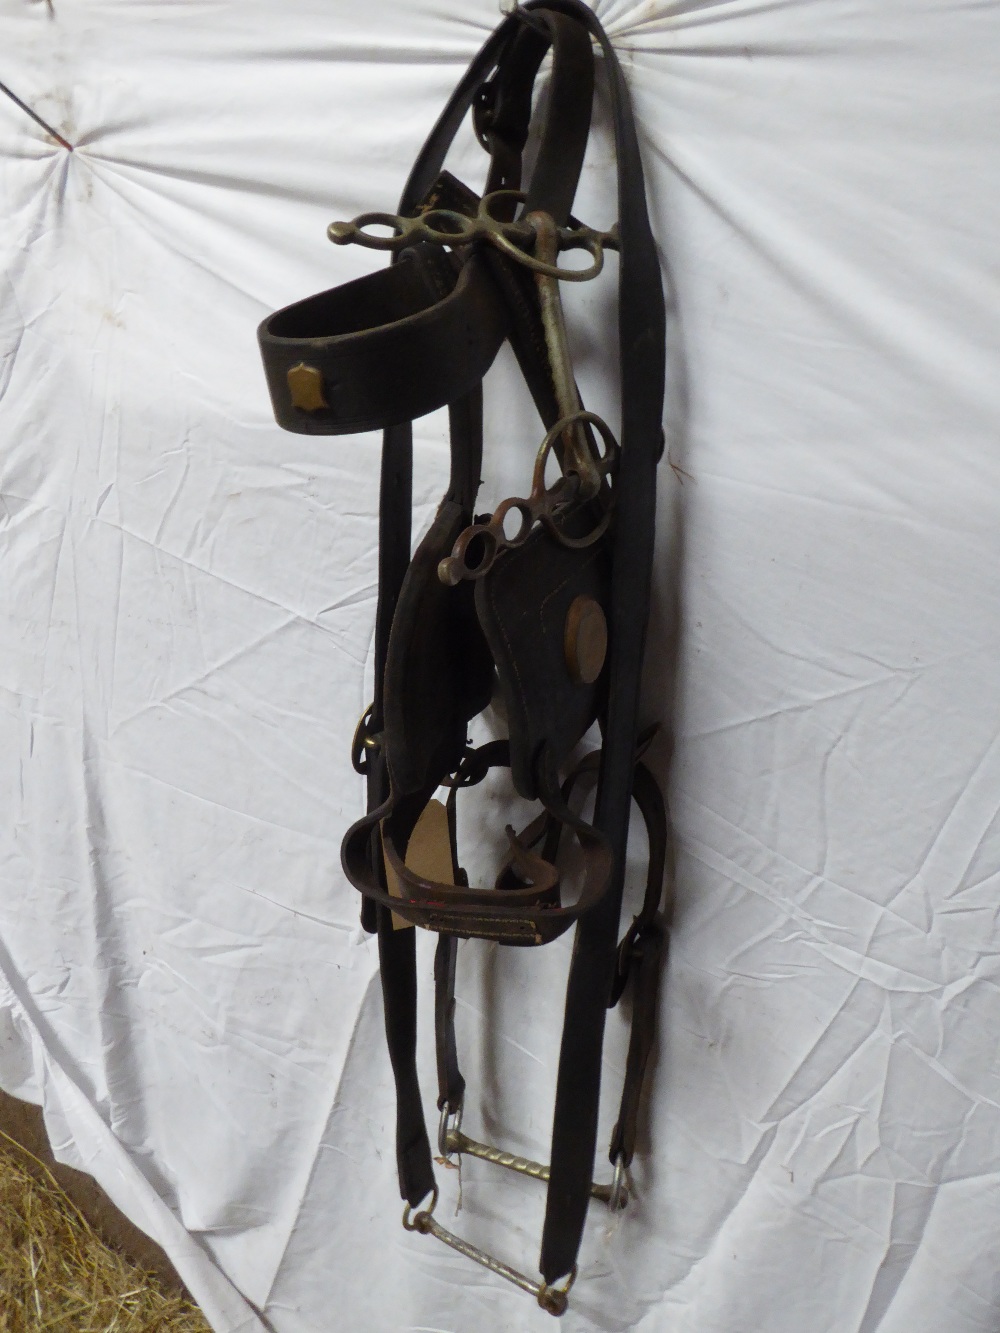 Black agricultural bridle with a driving bit, studs and bearing rein with bit